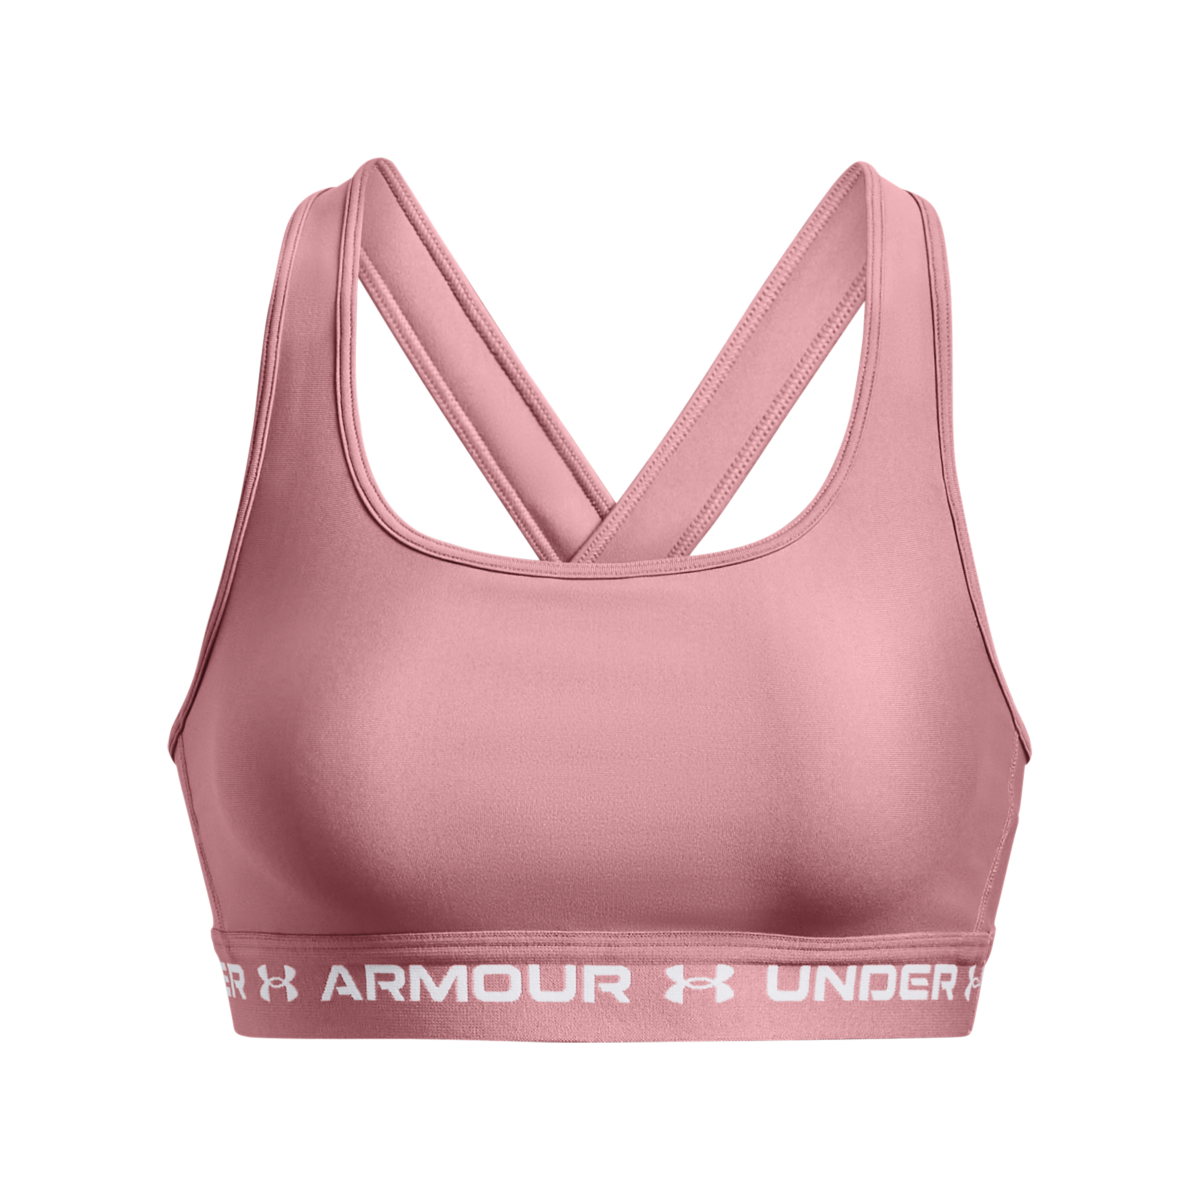 Under Armour - 1361034 Women's Armour® Mid Crossback Sports Bra - 697/P791 - Under Armour - 